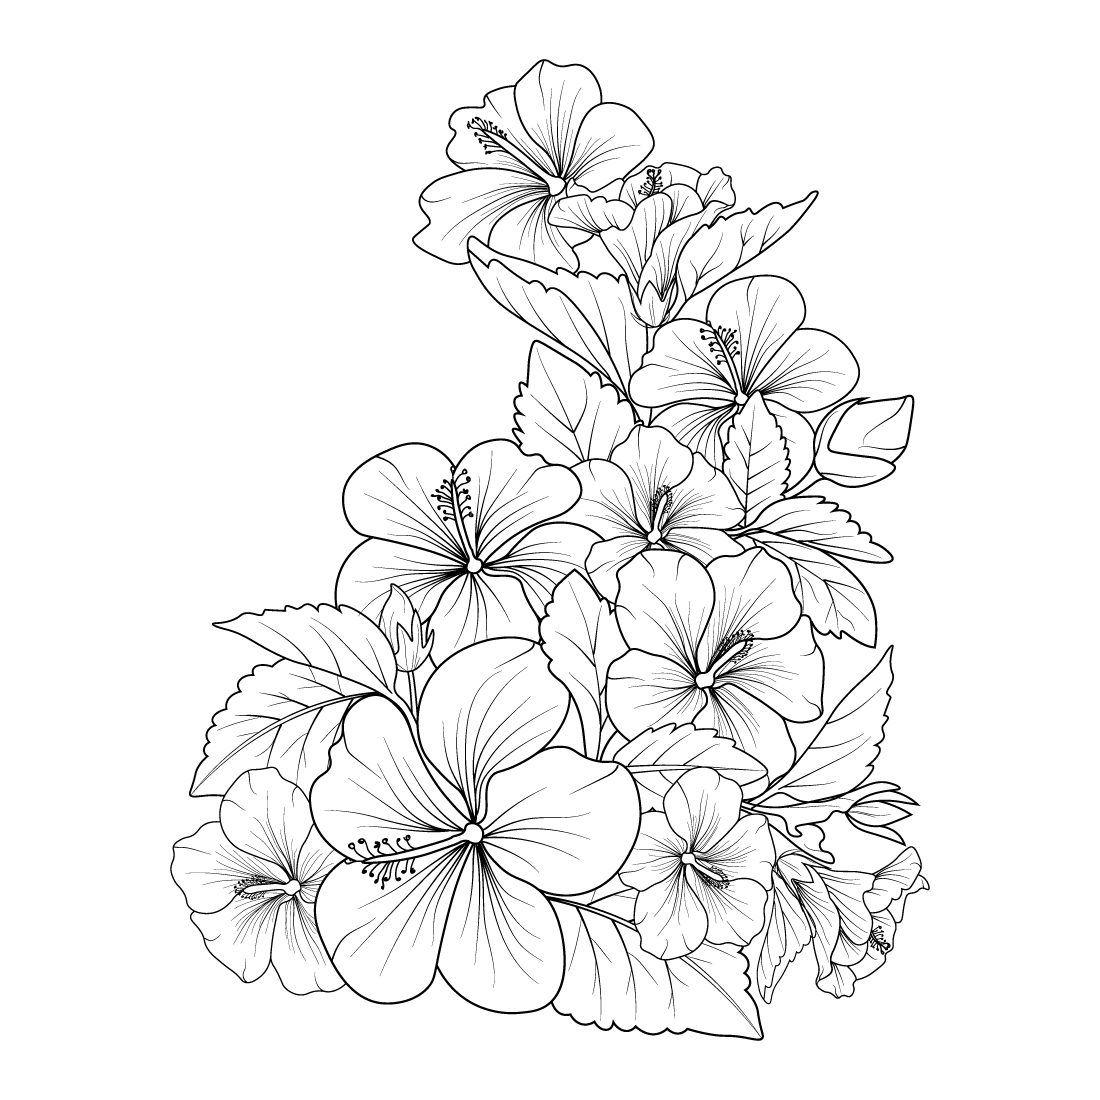 Hibiscus flowers illustration coloring page, simplicity, Embellishment, monochrome, rose vector art, preview image.